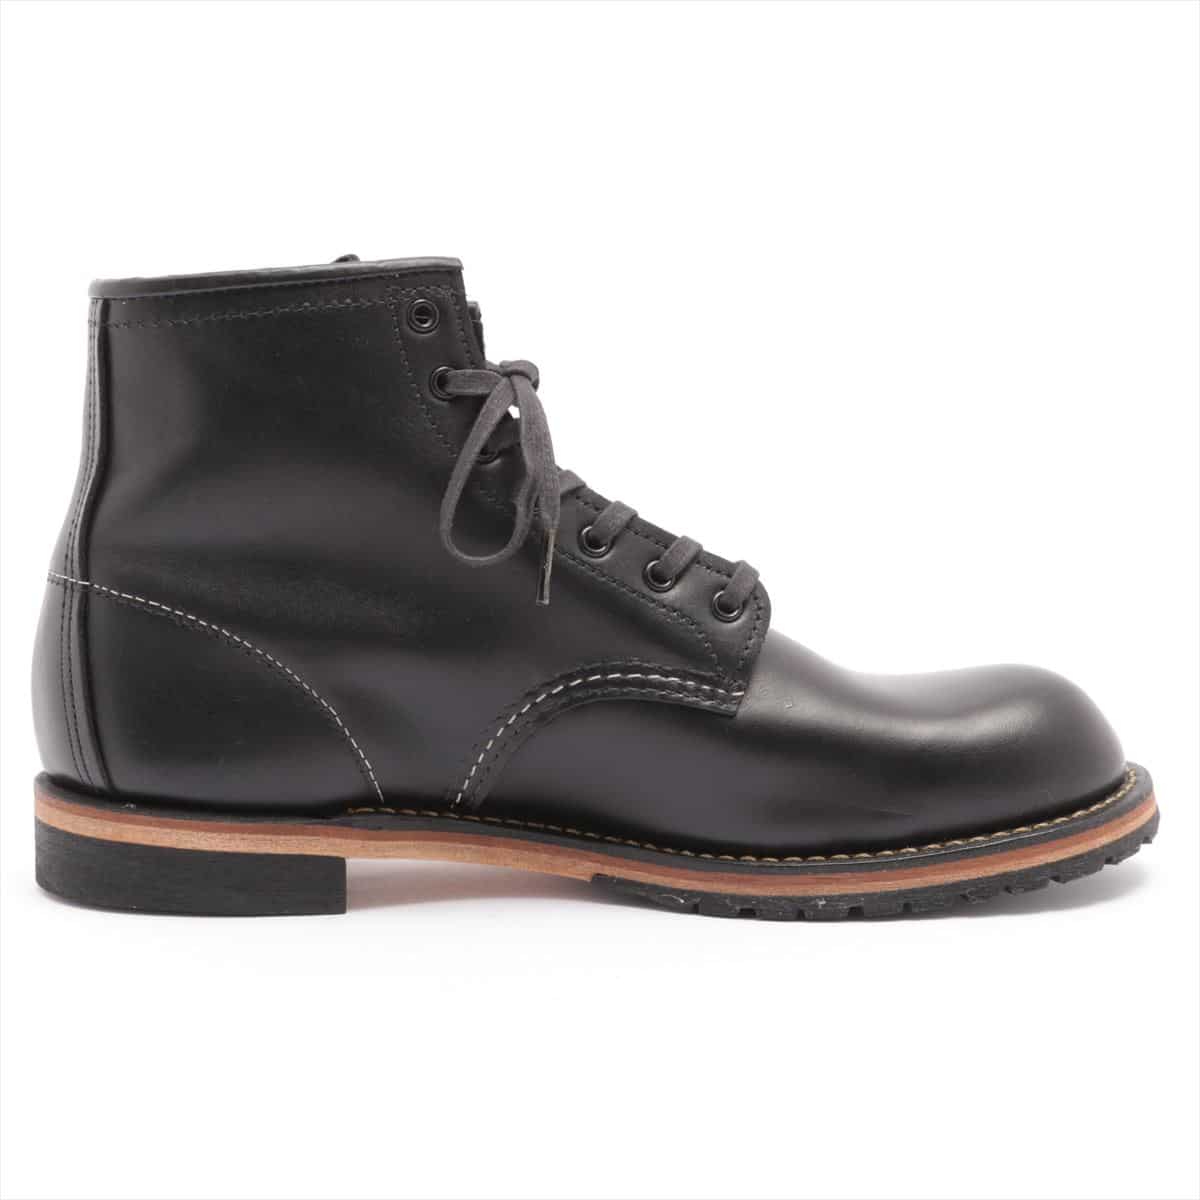 Red Wing Leather Boots 26cm Men's Black Beckman boots 9414